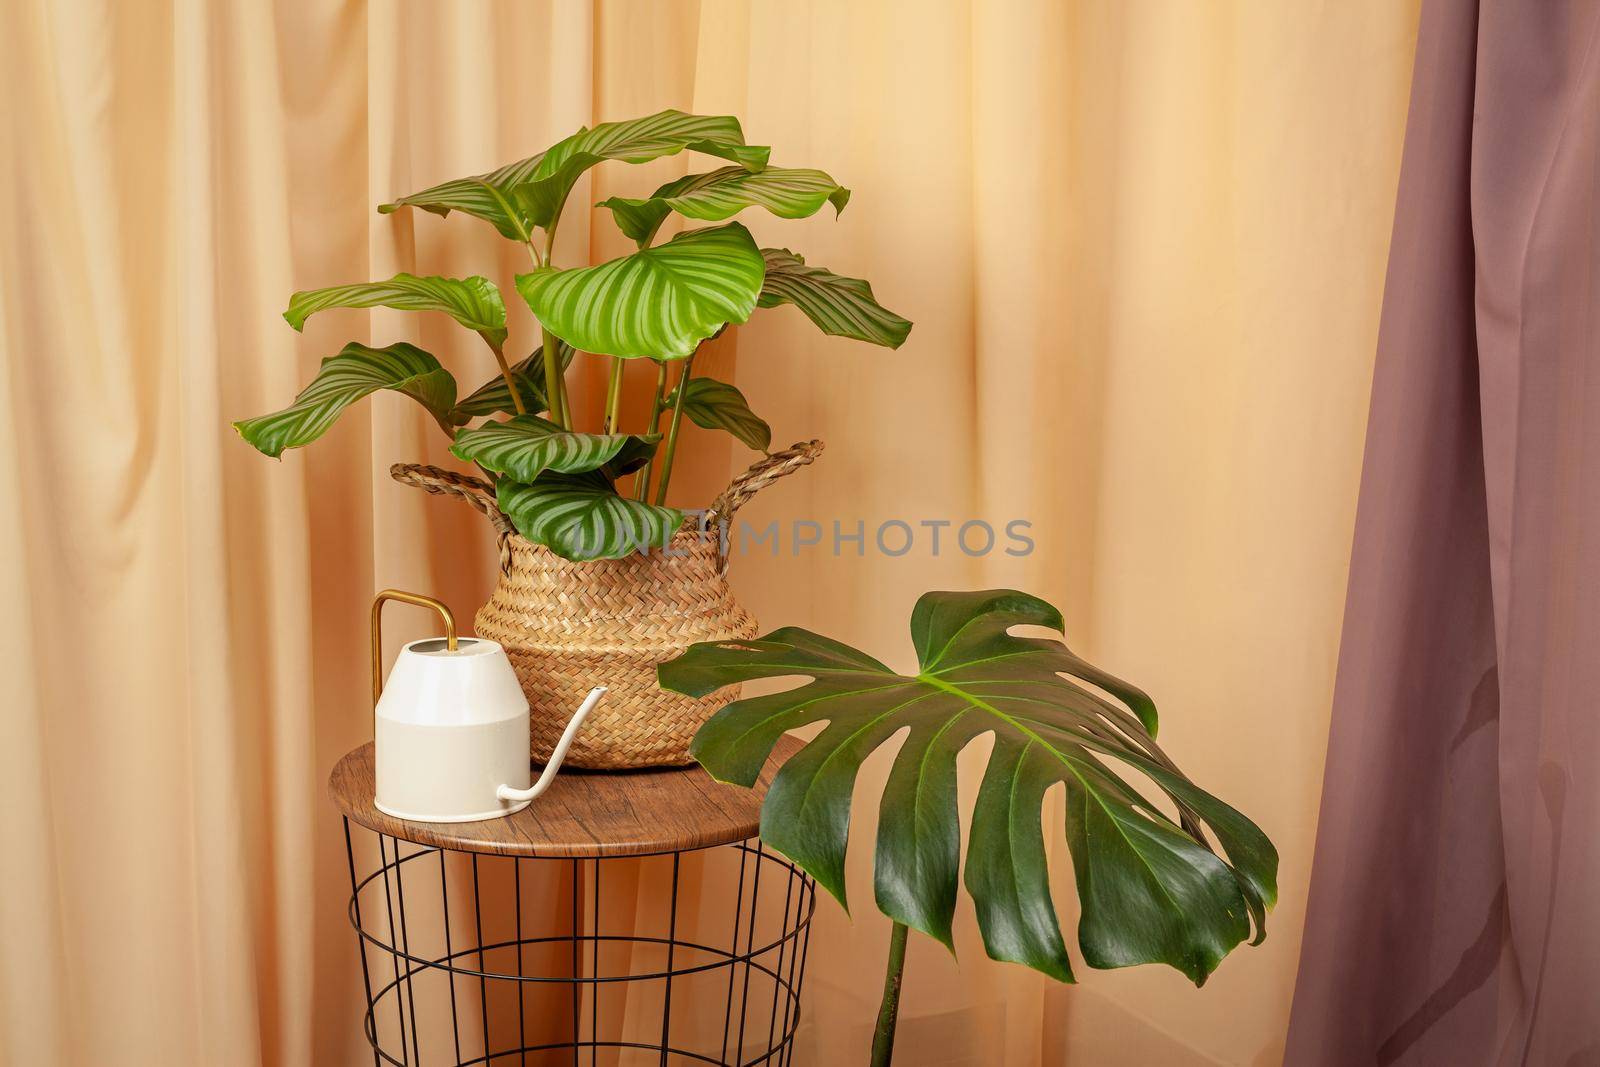 Still life with plants Calathea Orbifolia and Monstera Deliciosa with watering can on a brown curtains background.